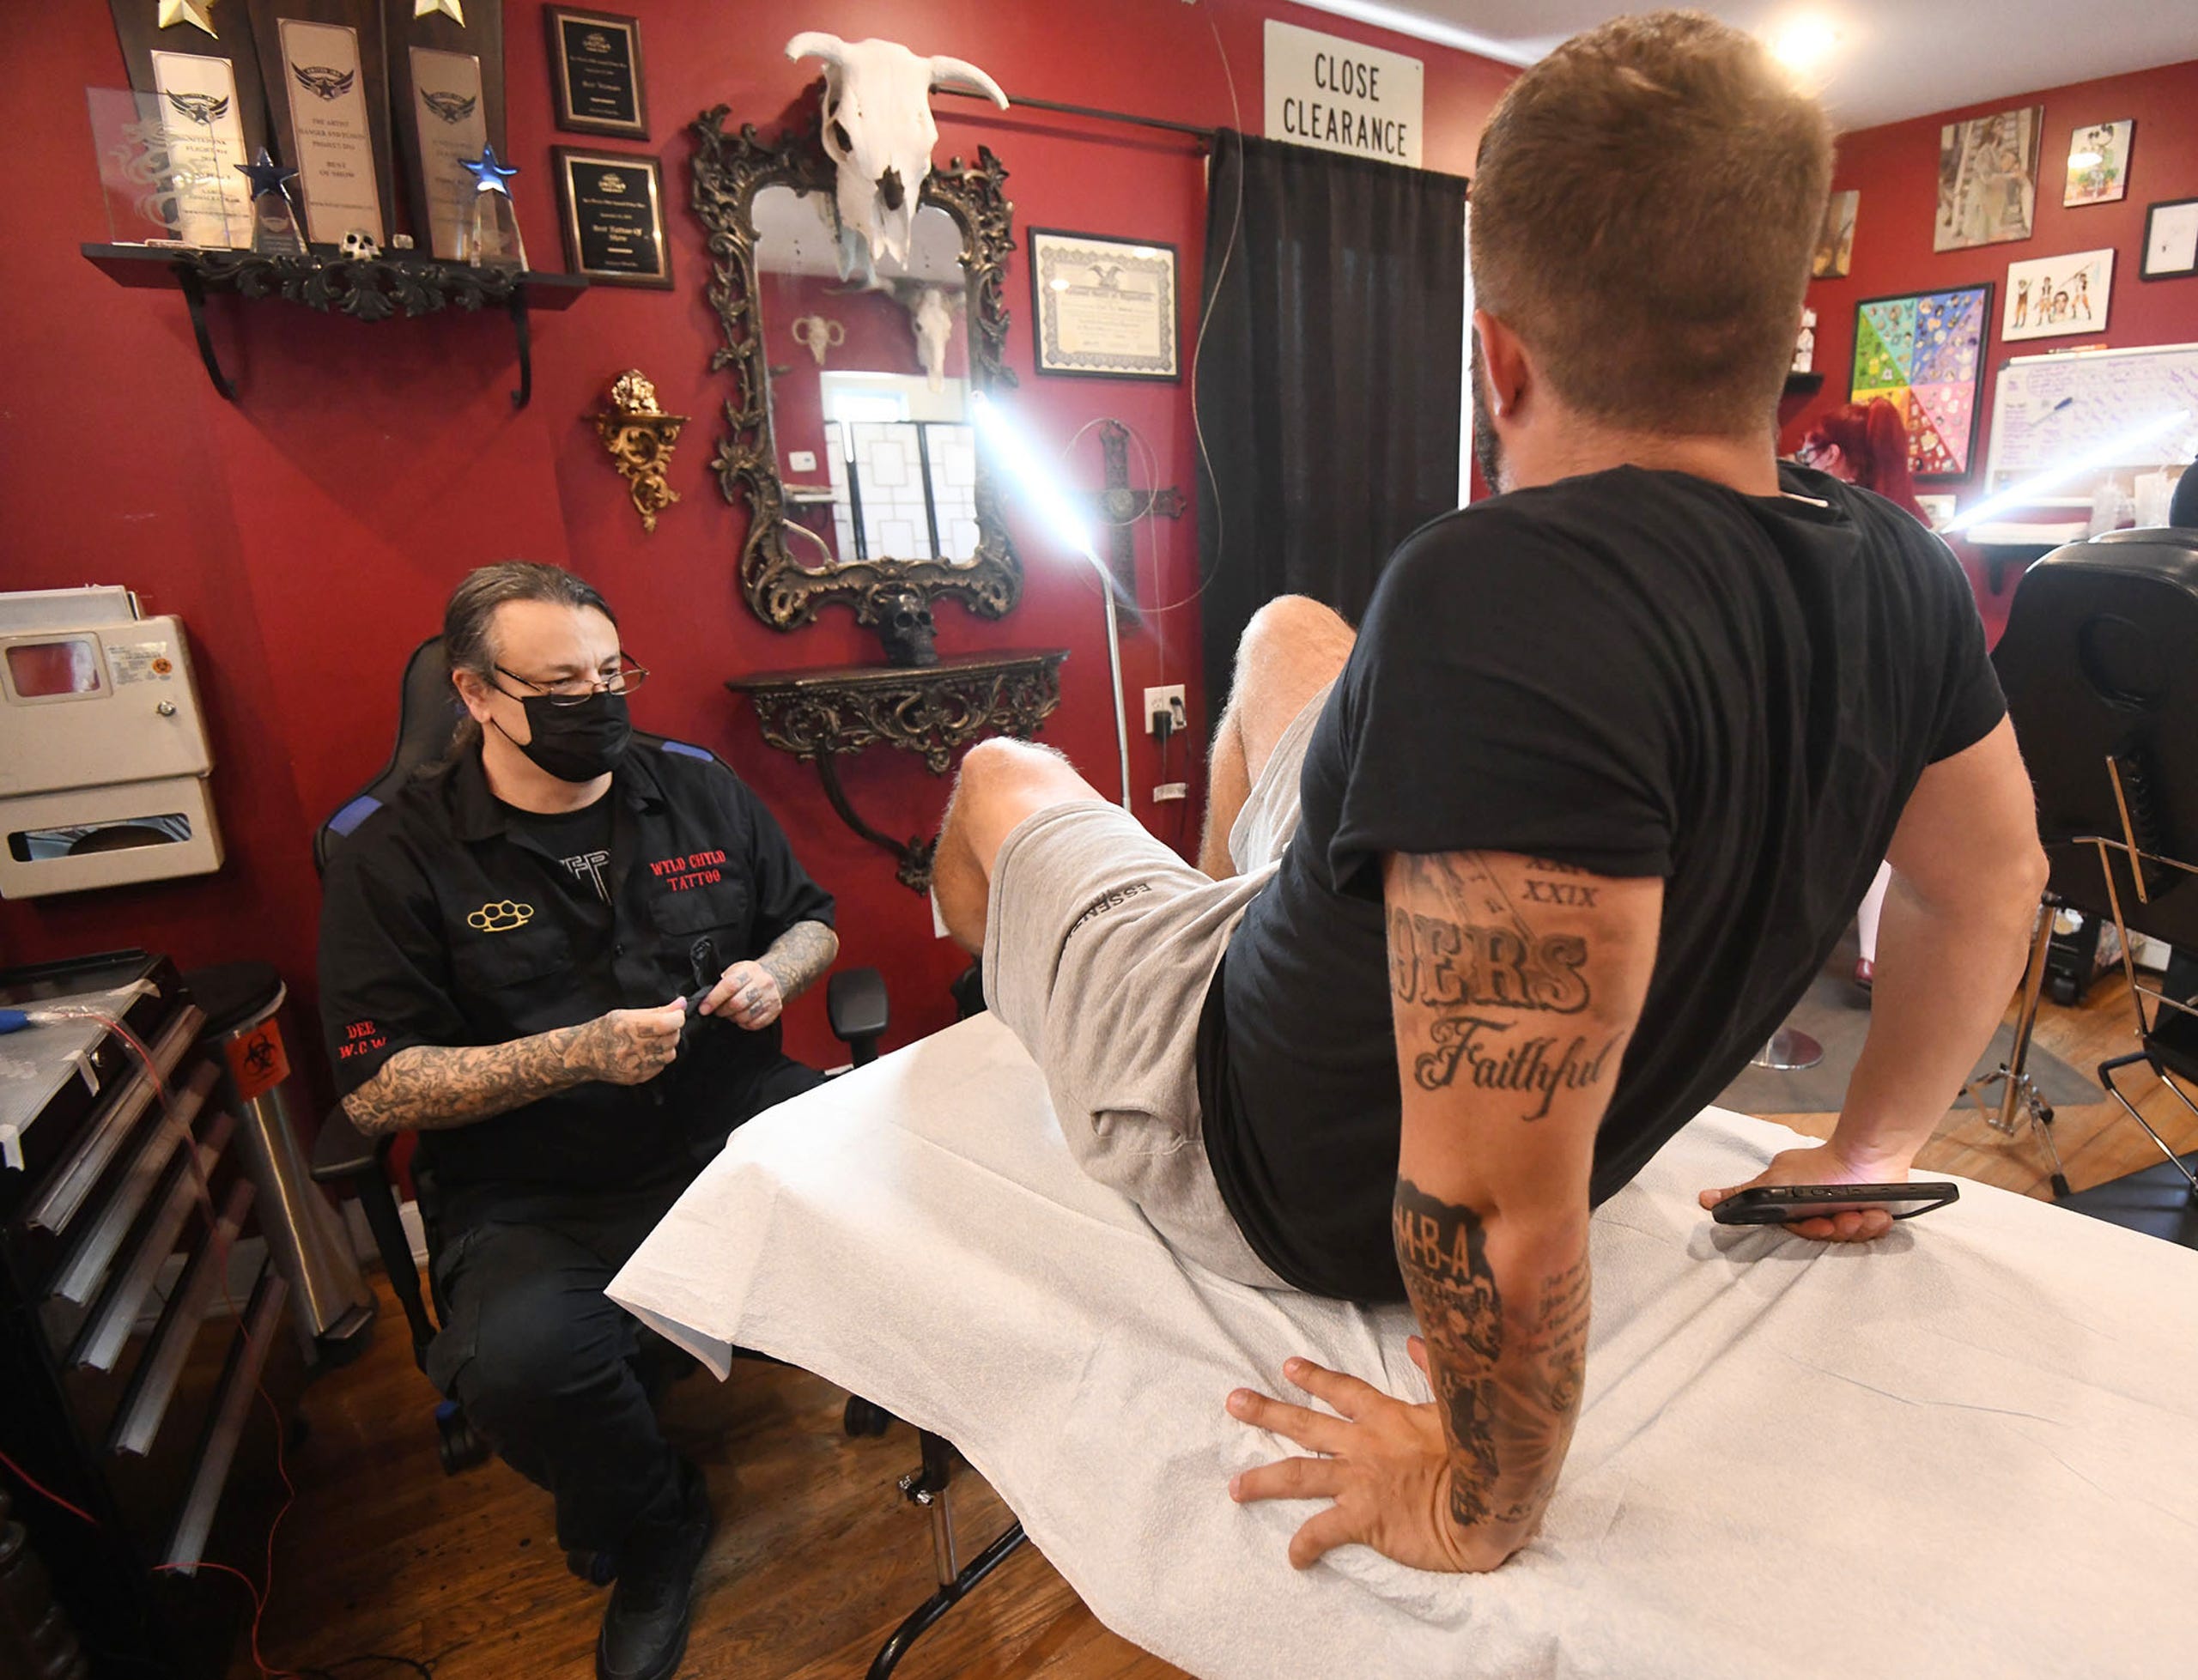 Client Vincent Smith of Plainfield arrives to get final work done on his NBA basketball star Seth Curry leg tattoo by tattooist Dee Whitcomb Sept. 20, 2022.